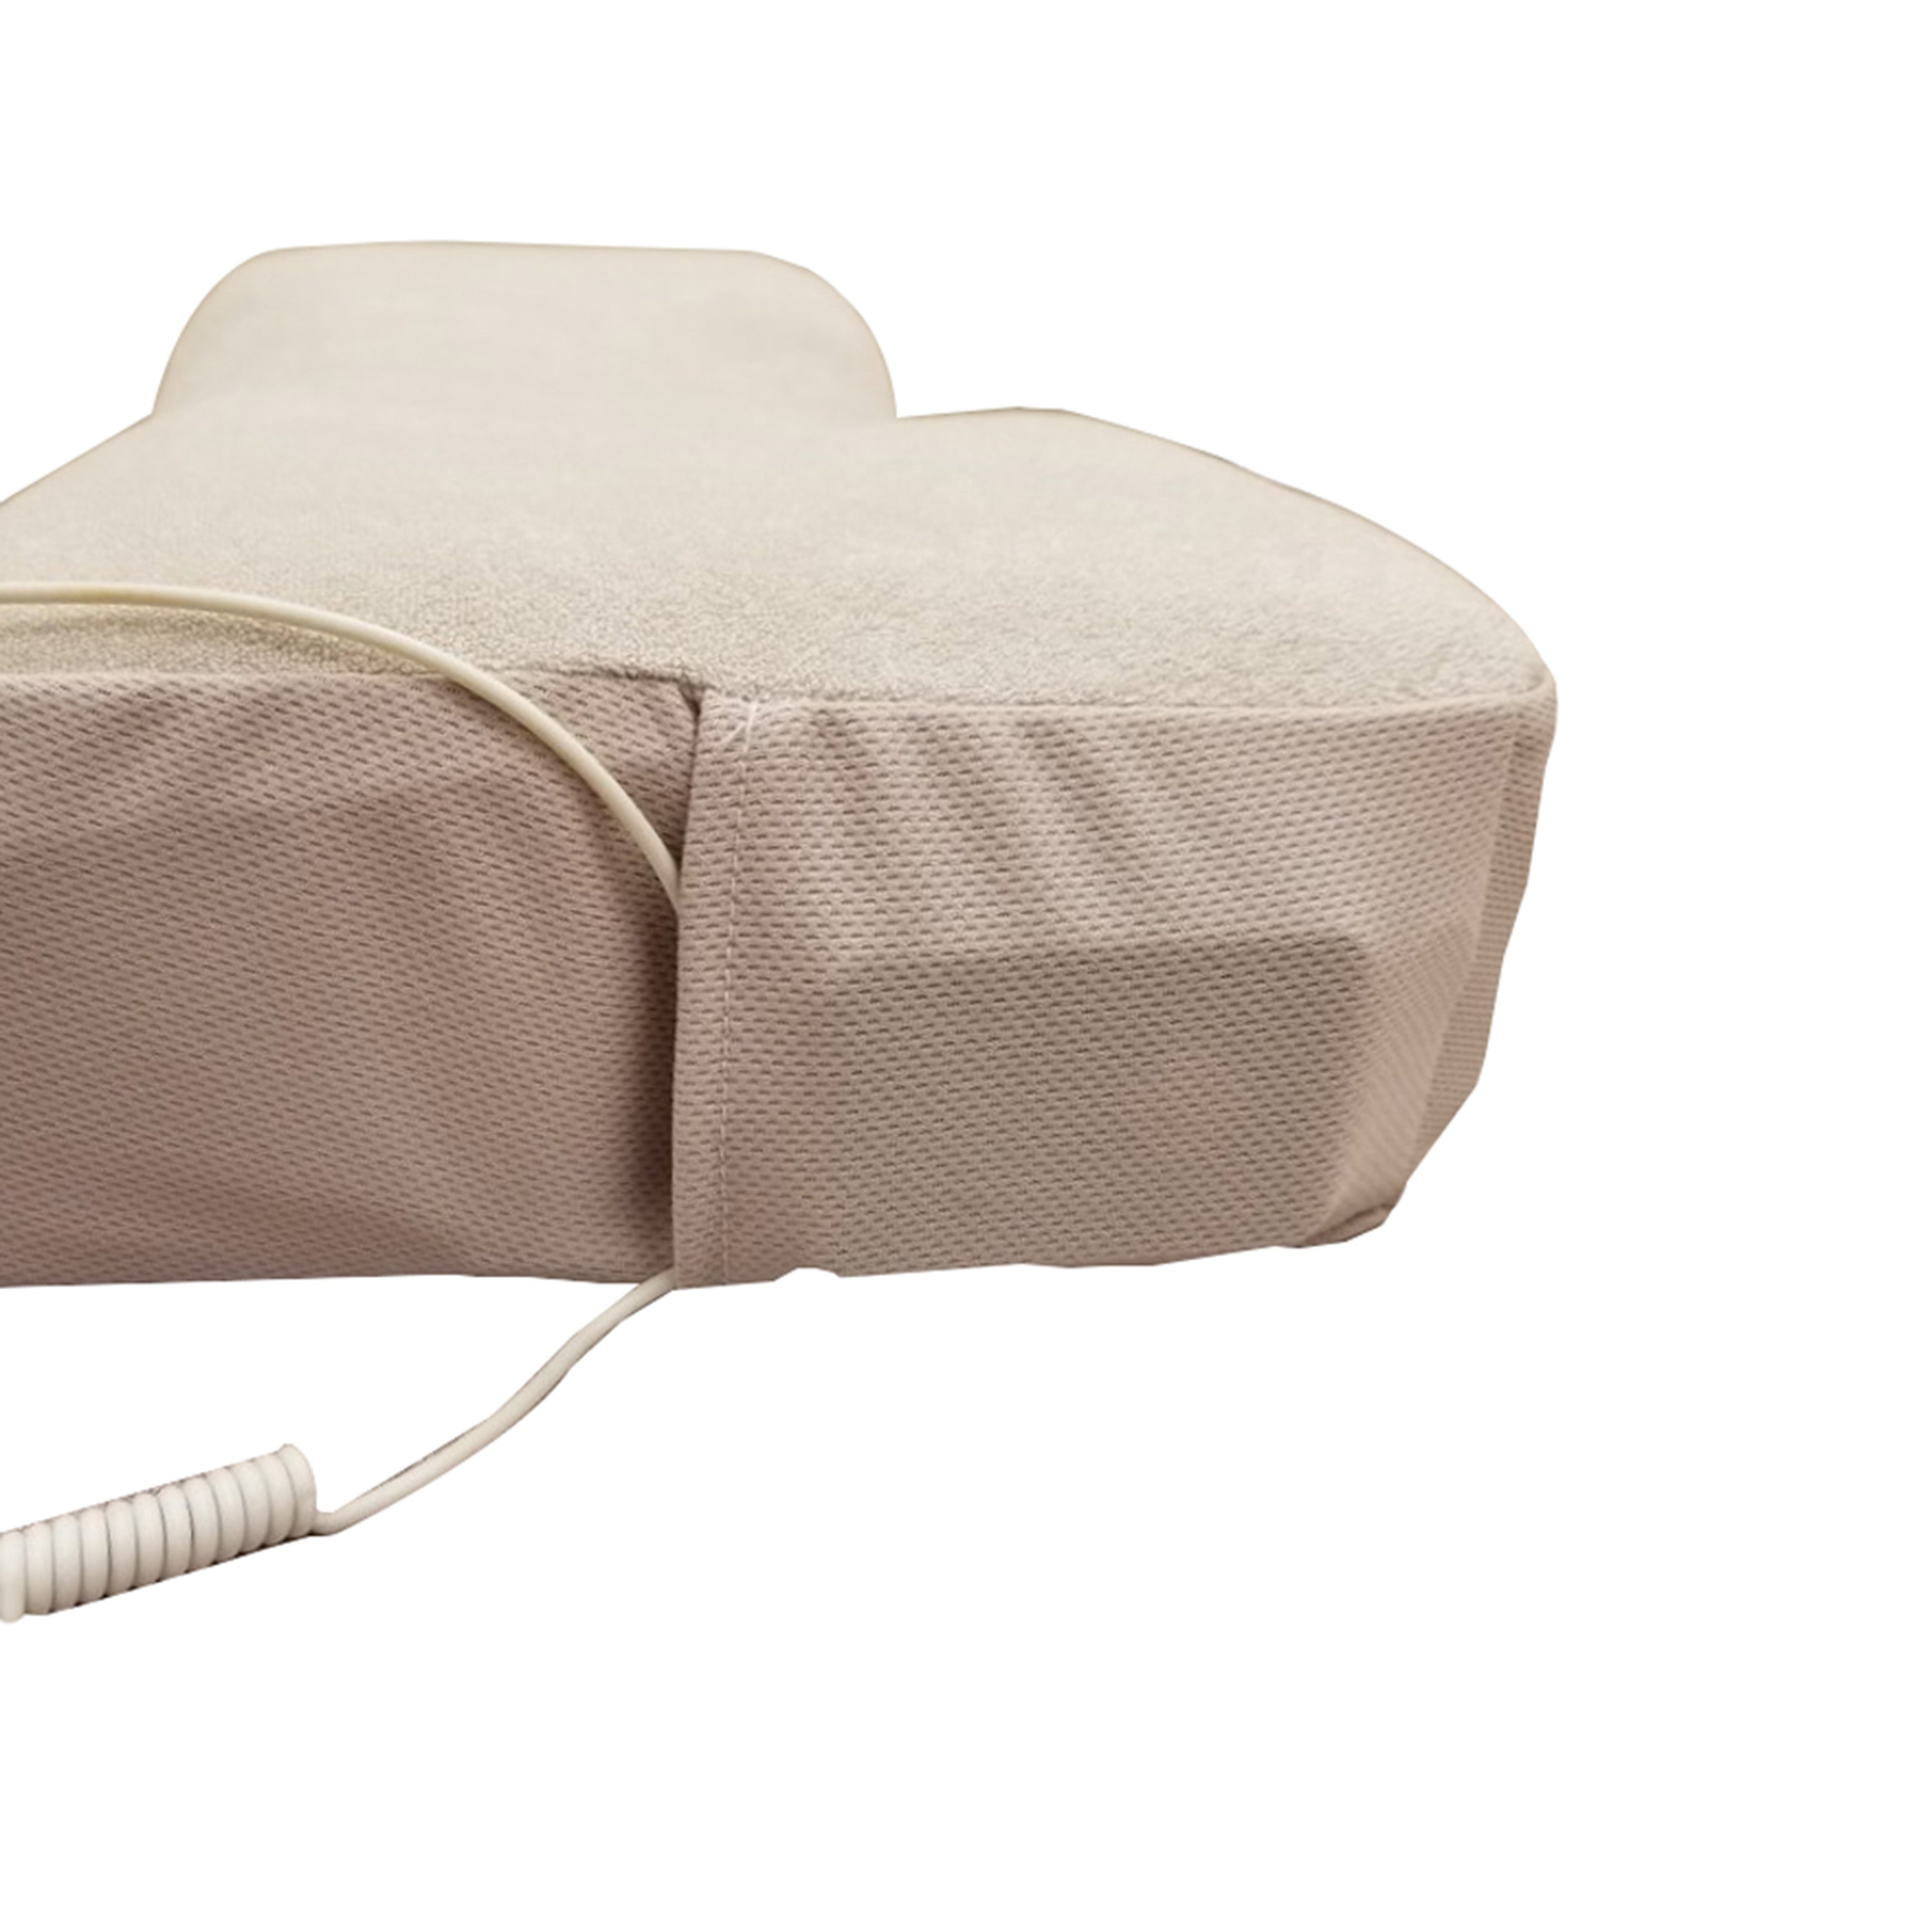 Bone Conduction Sound Therapy Cervical Pillow